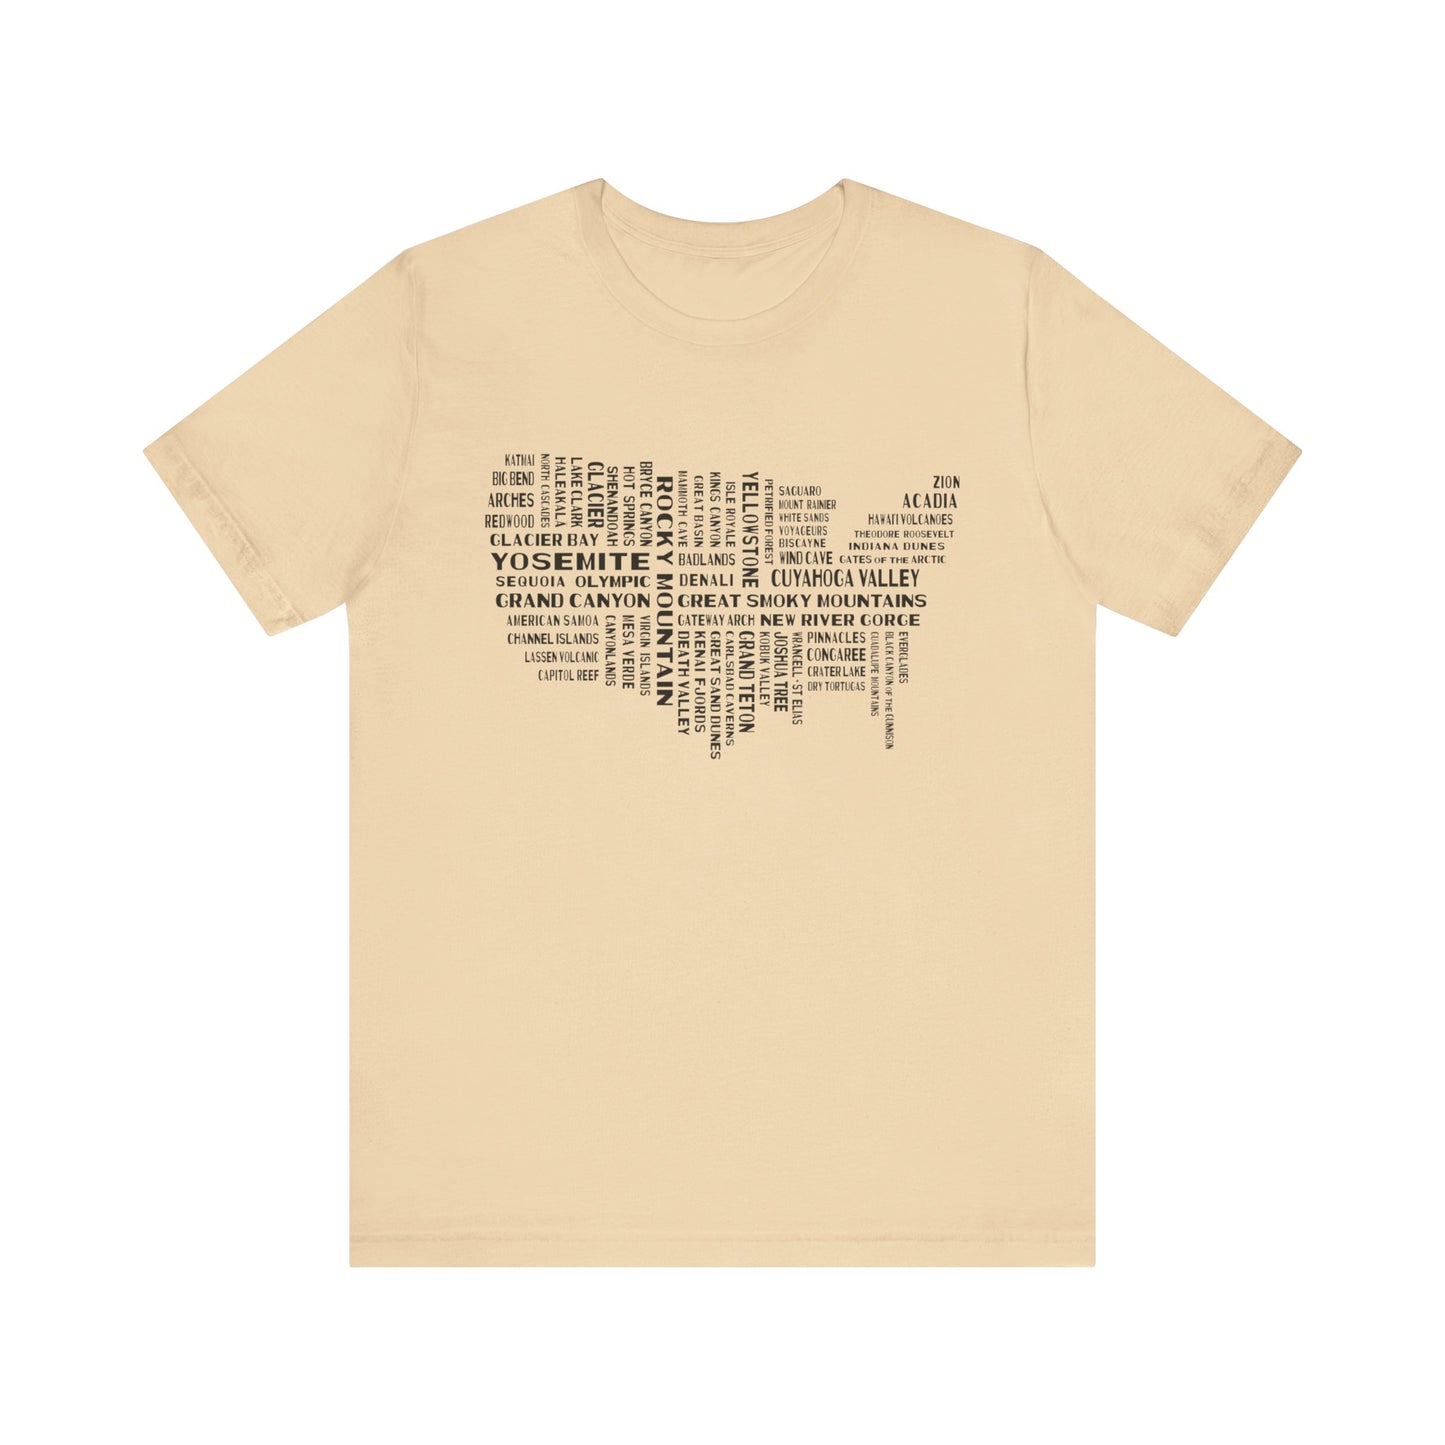 America's National Parks T-Shirt